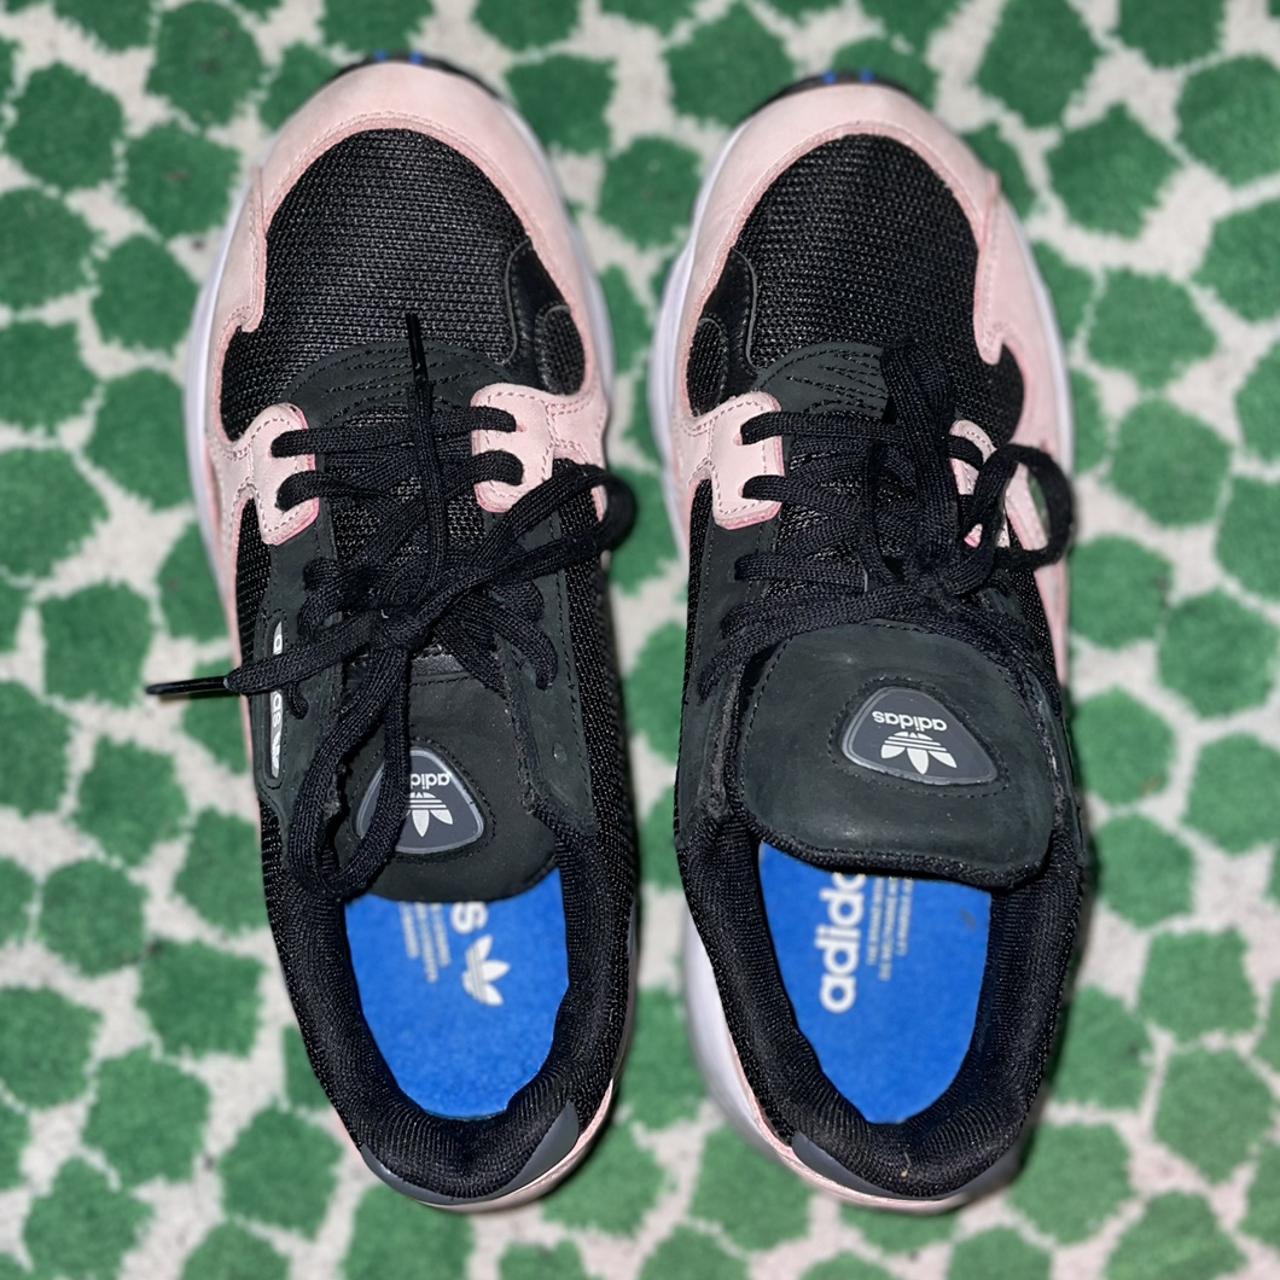 Kylie Jenner adidas Falcon Black Pink B28126 Release Date - SBD